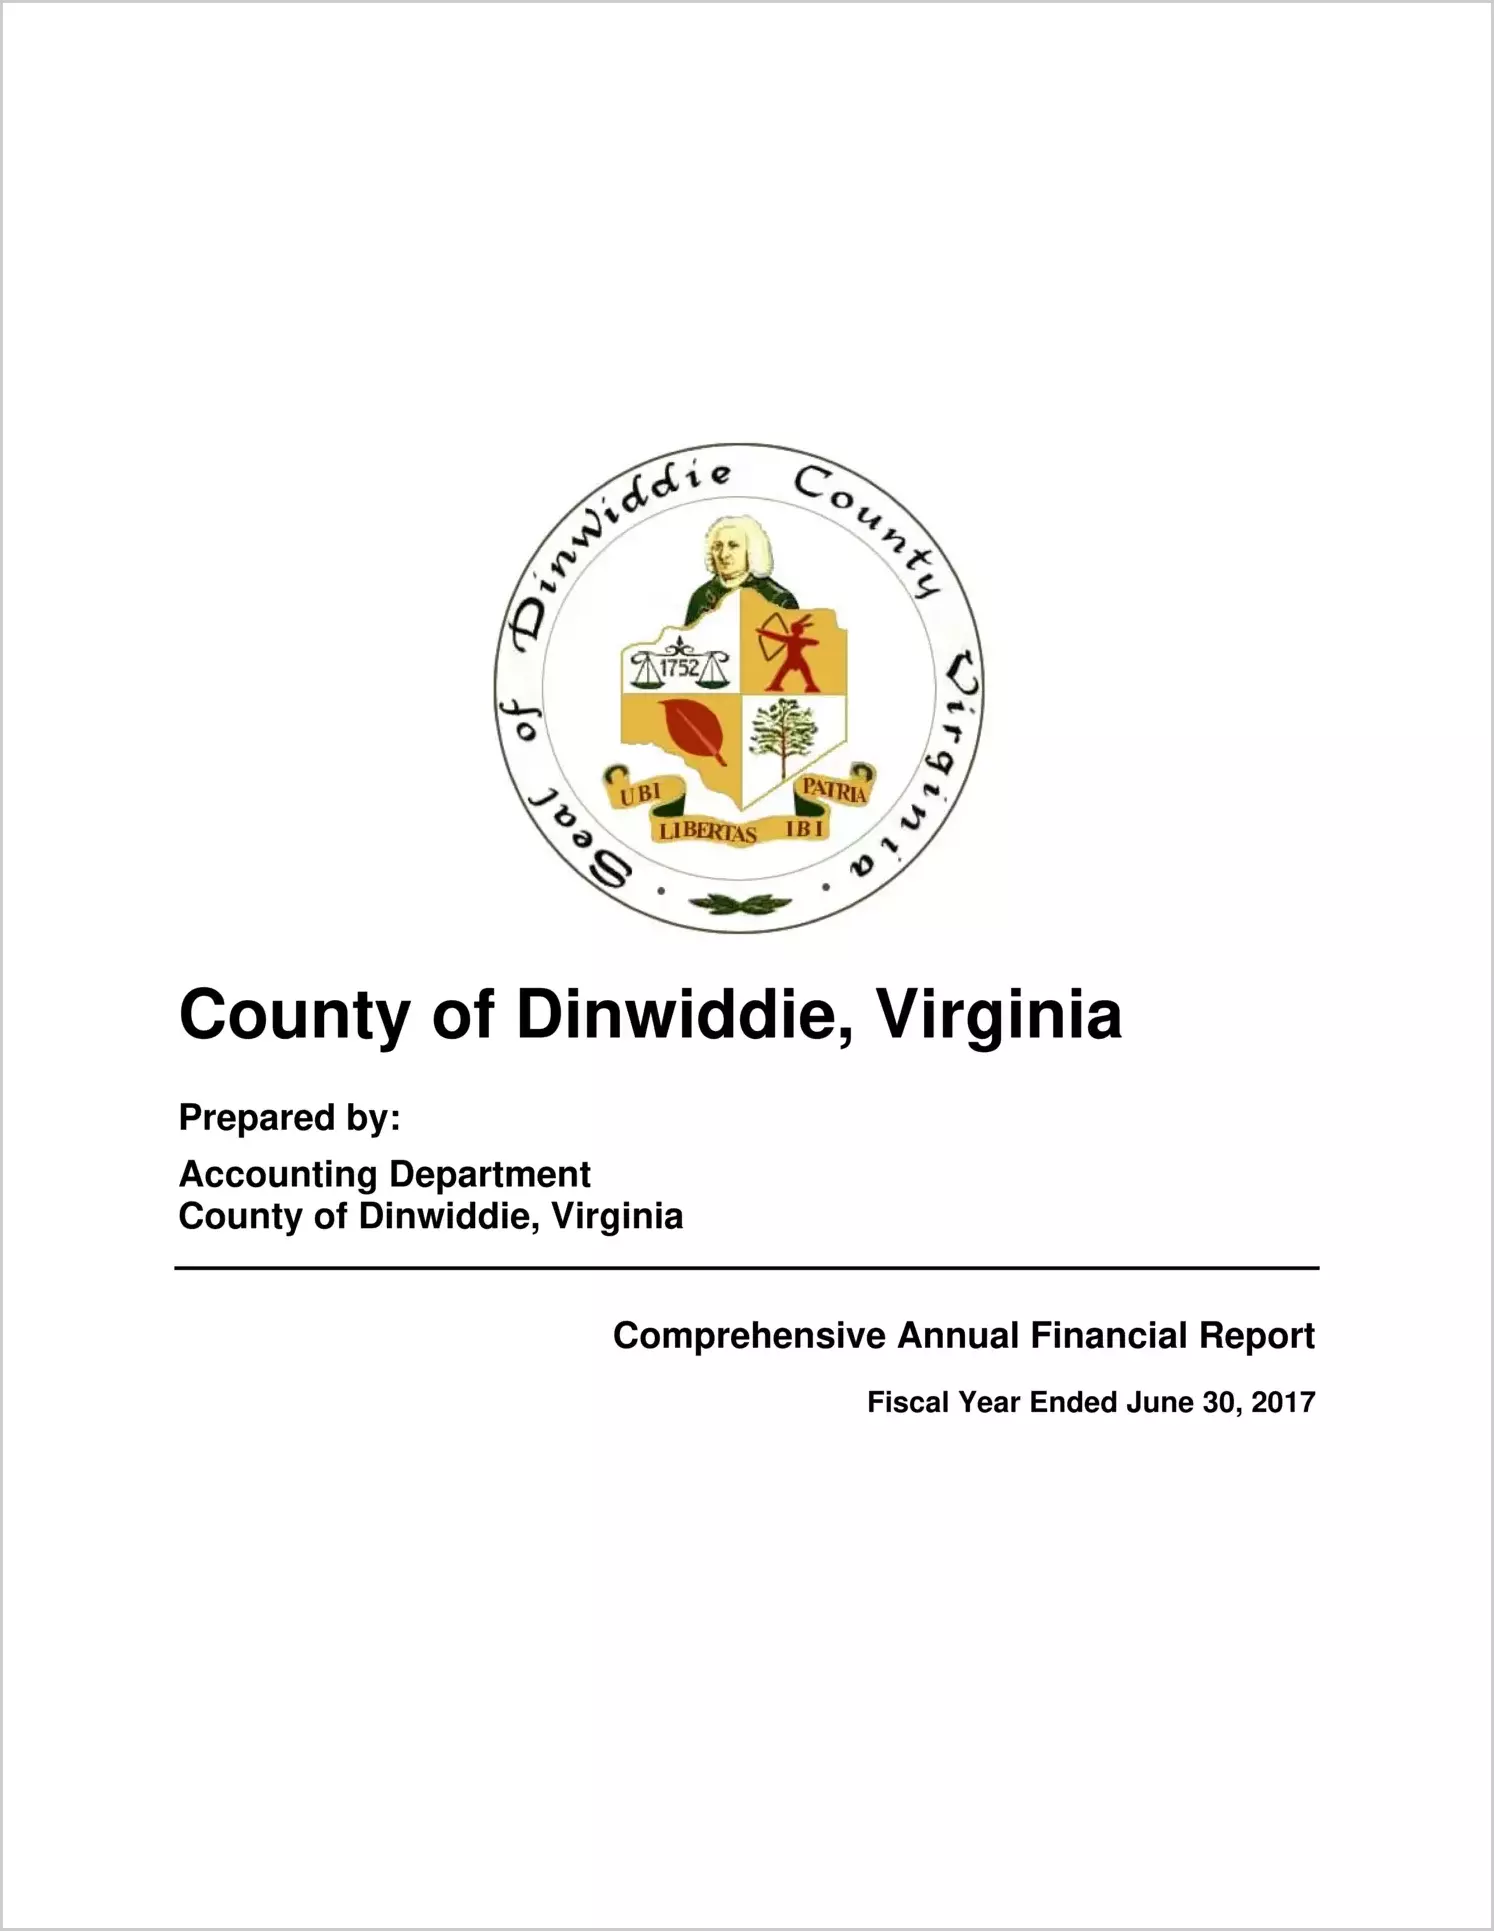 2017 Annual Financial Report for County of Dinwiddie